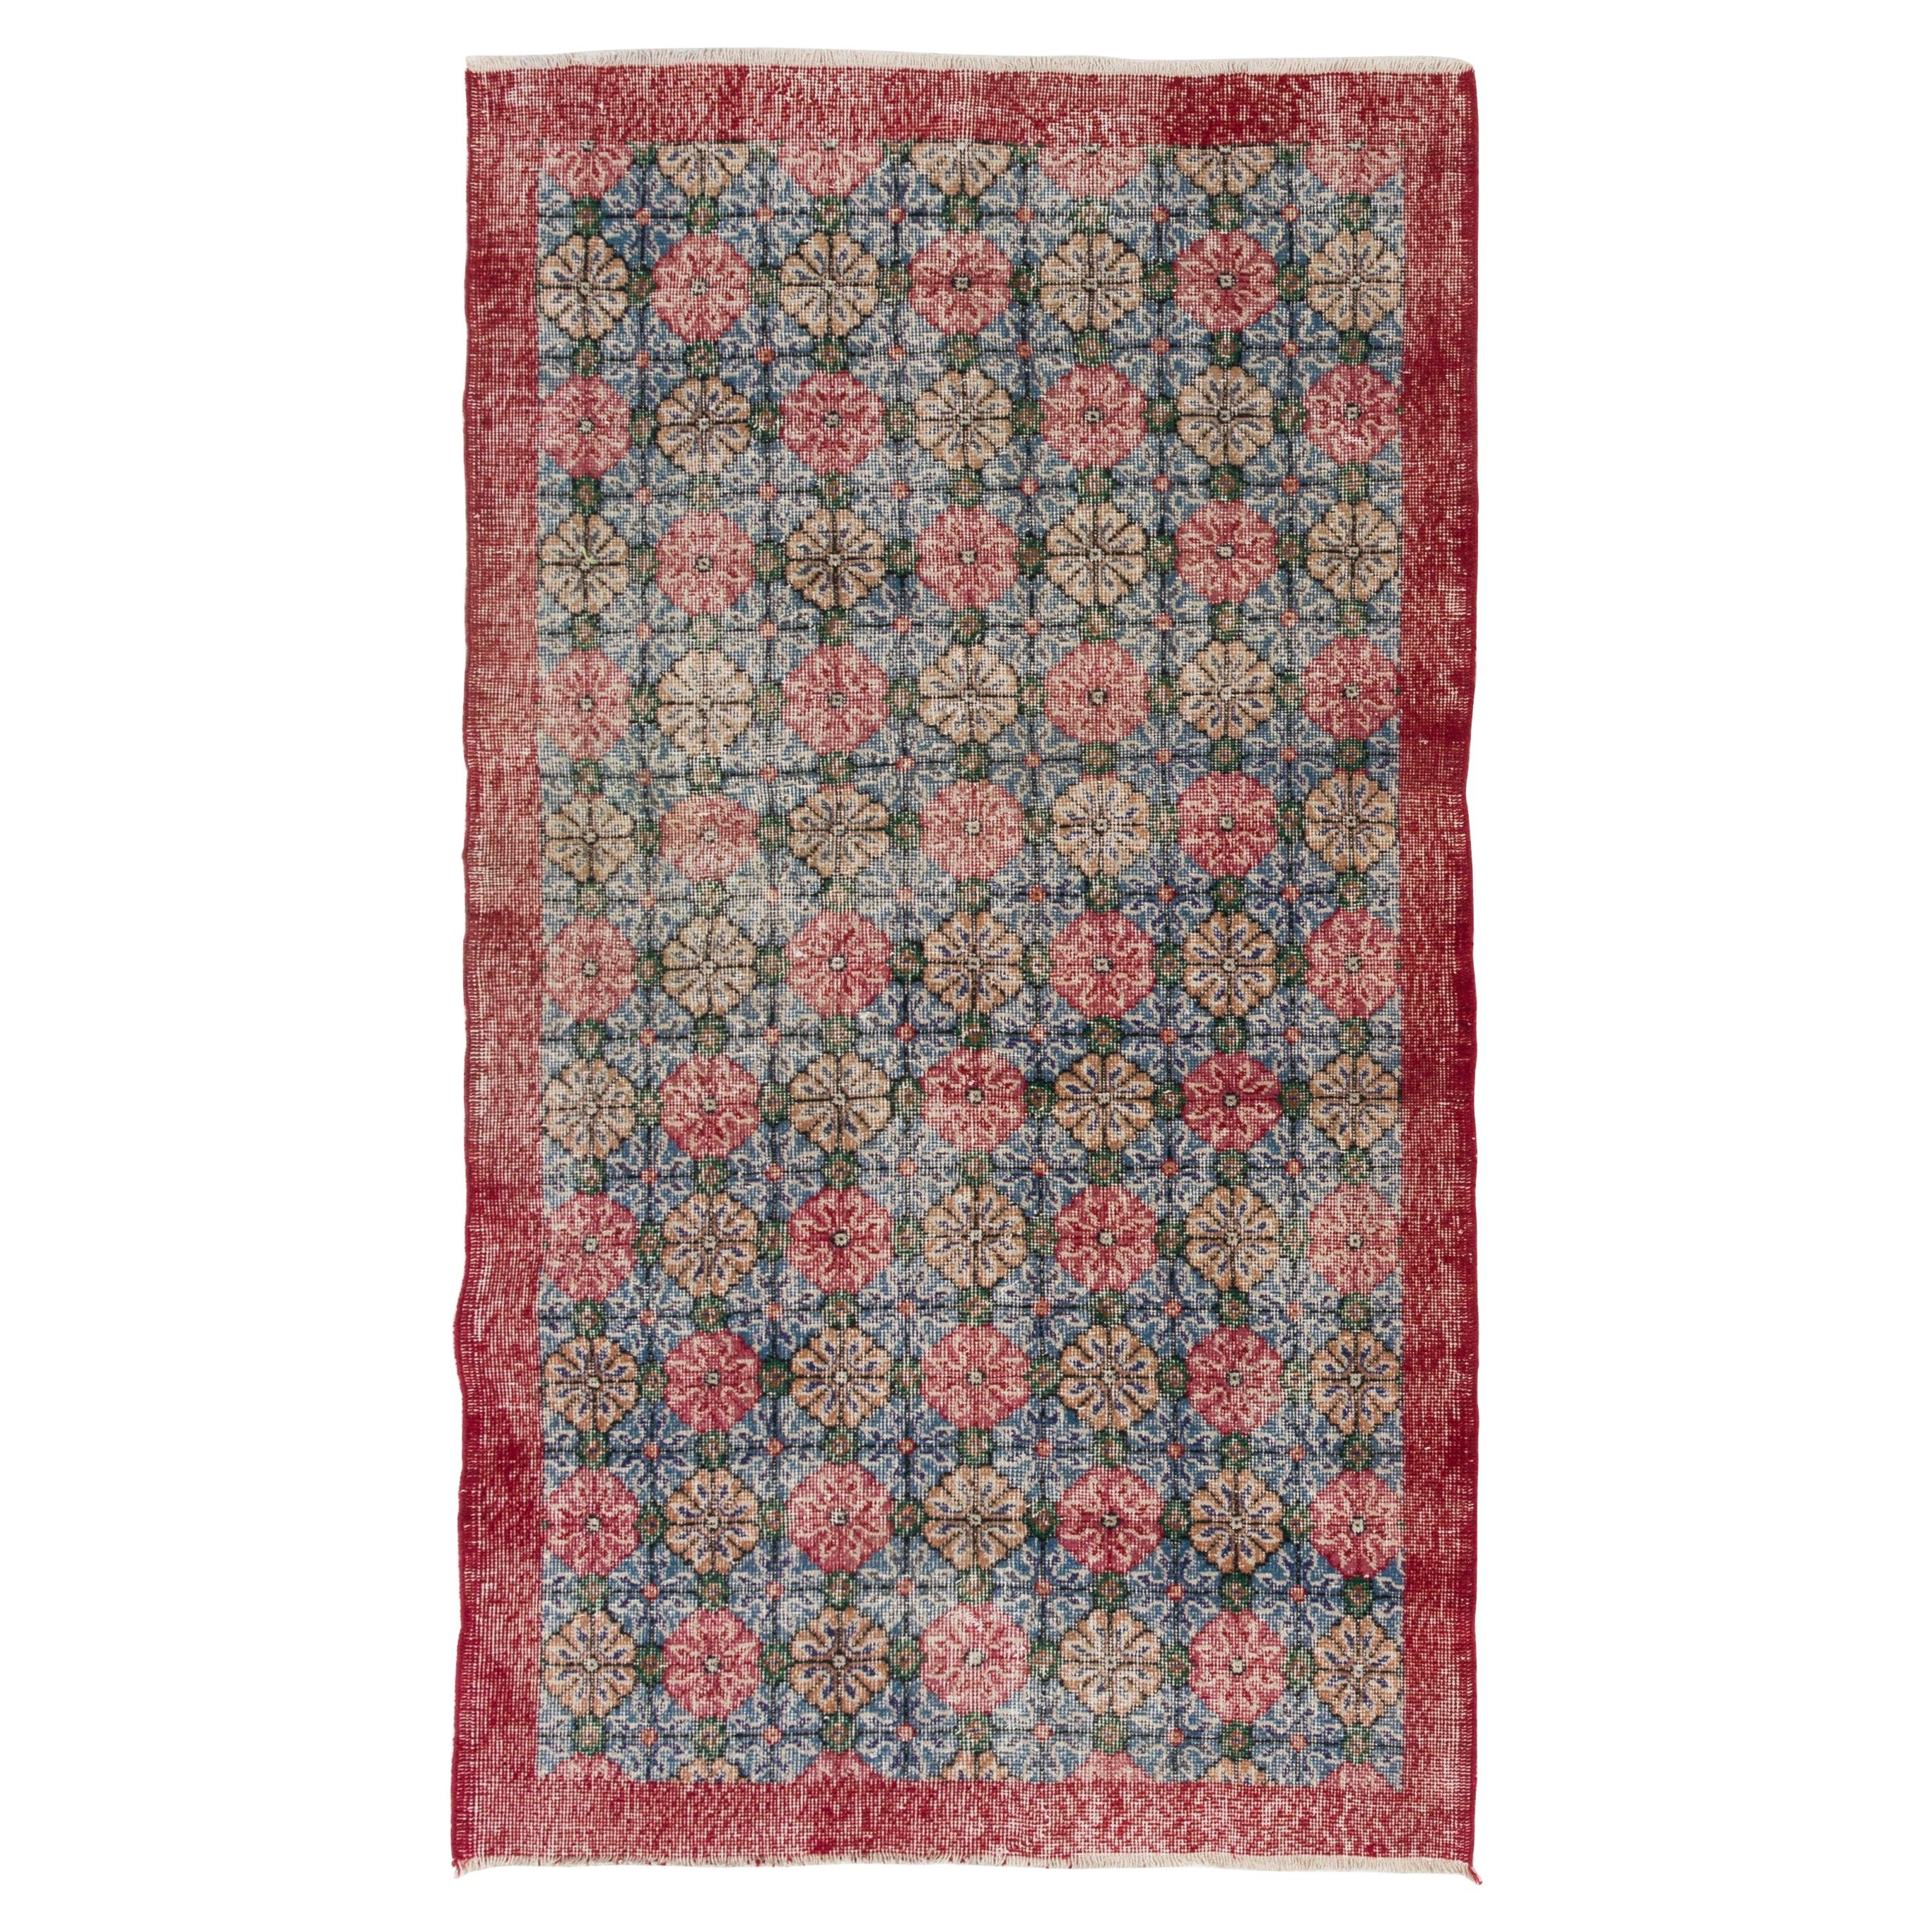 Vintage Handmade Turkish Accent Rug with All-Over Floral Design. 4 x 7 ft